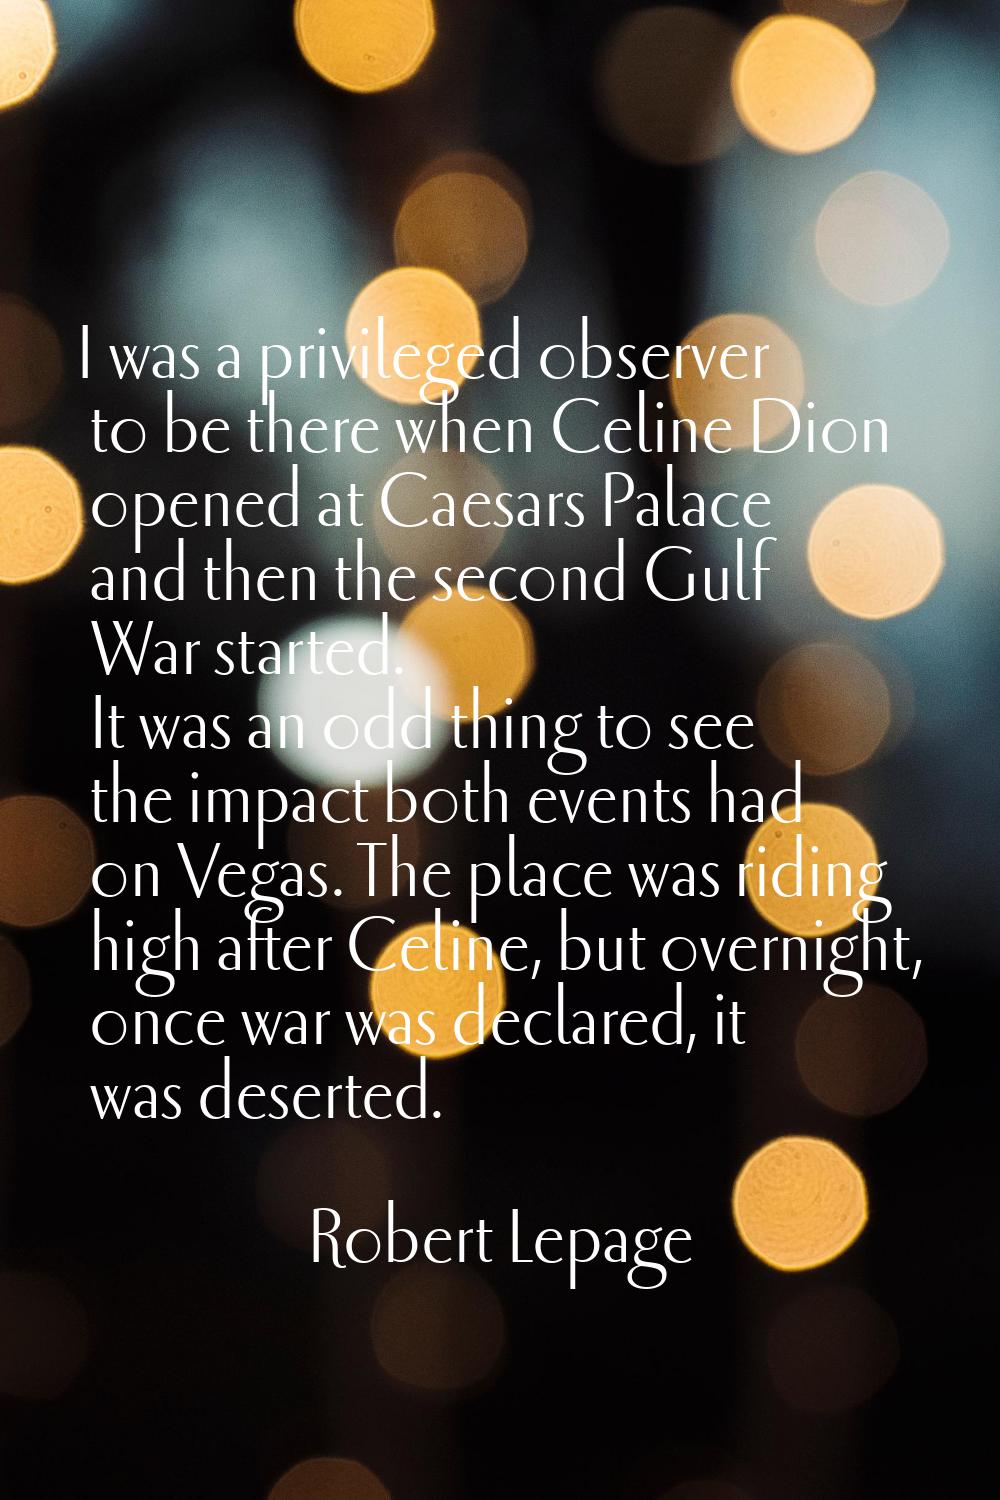 I was a privileged observer to be there when Celine Dion opened at Caesars Palace and then the seco